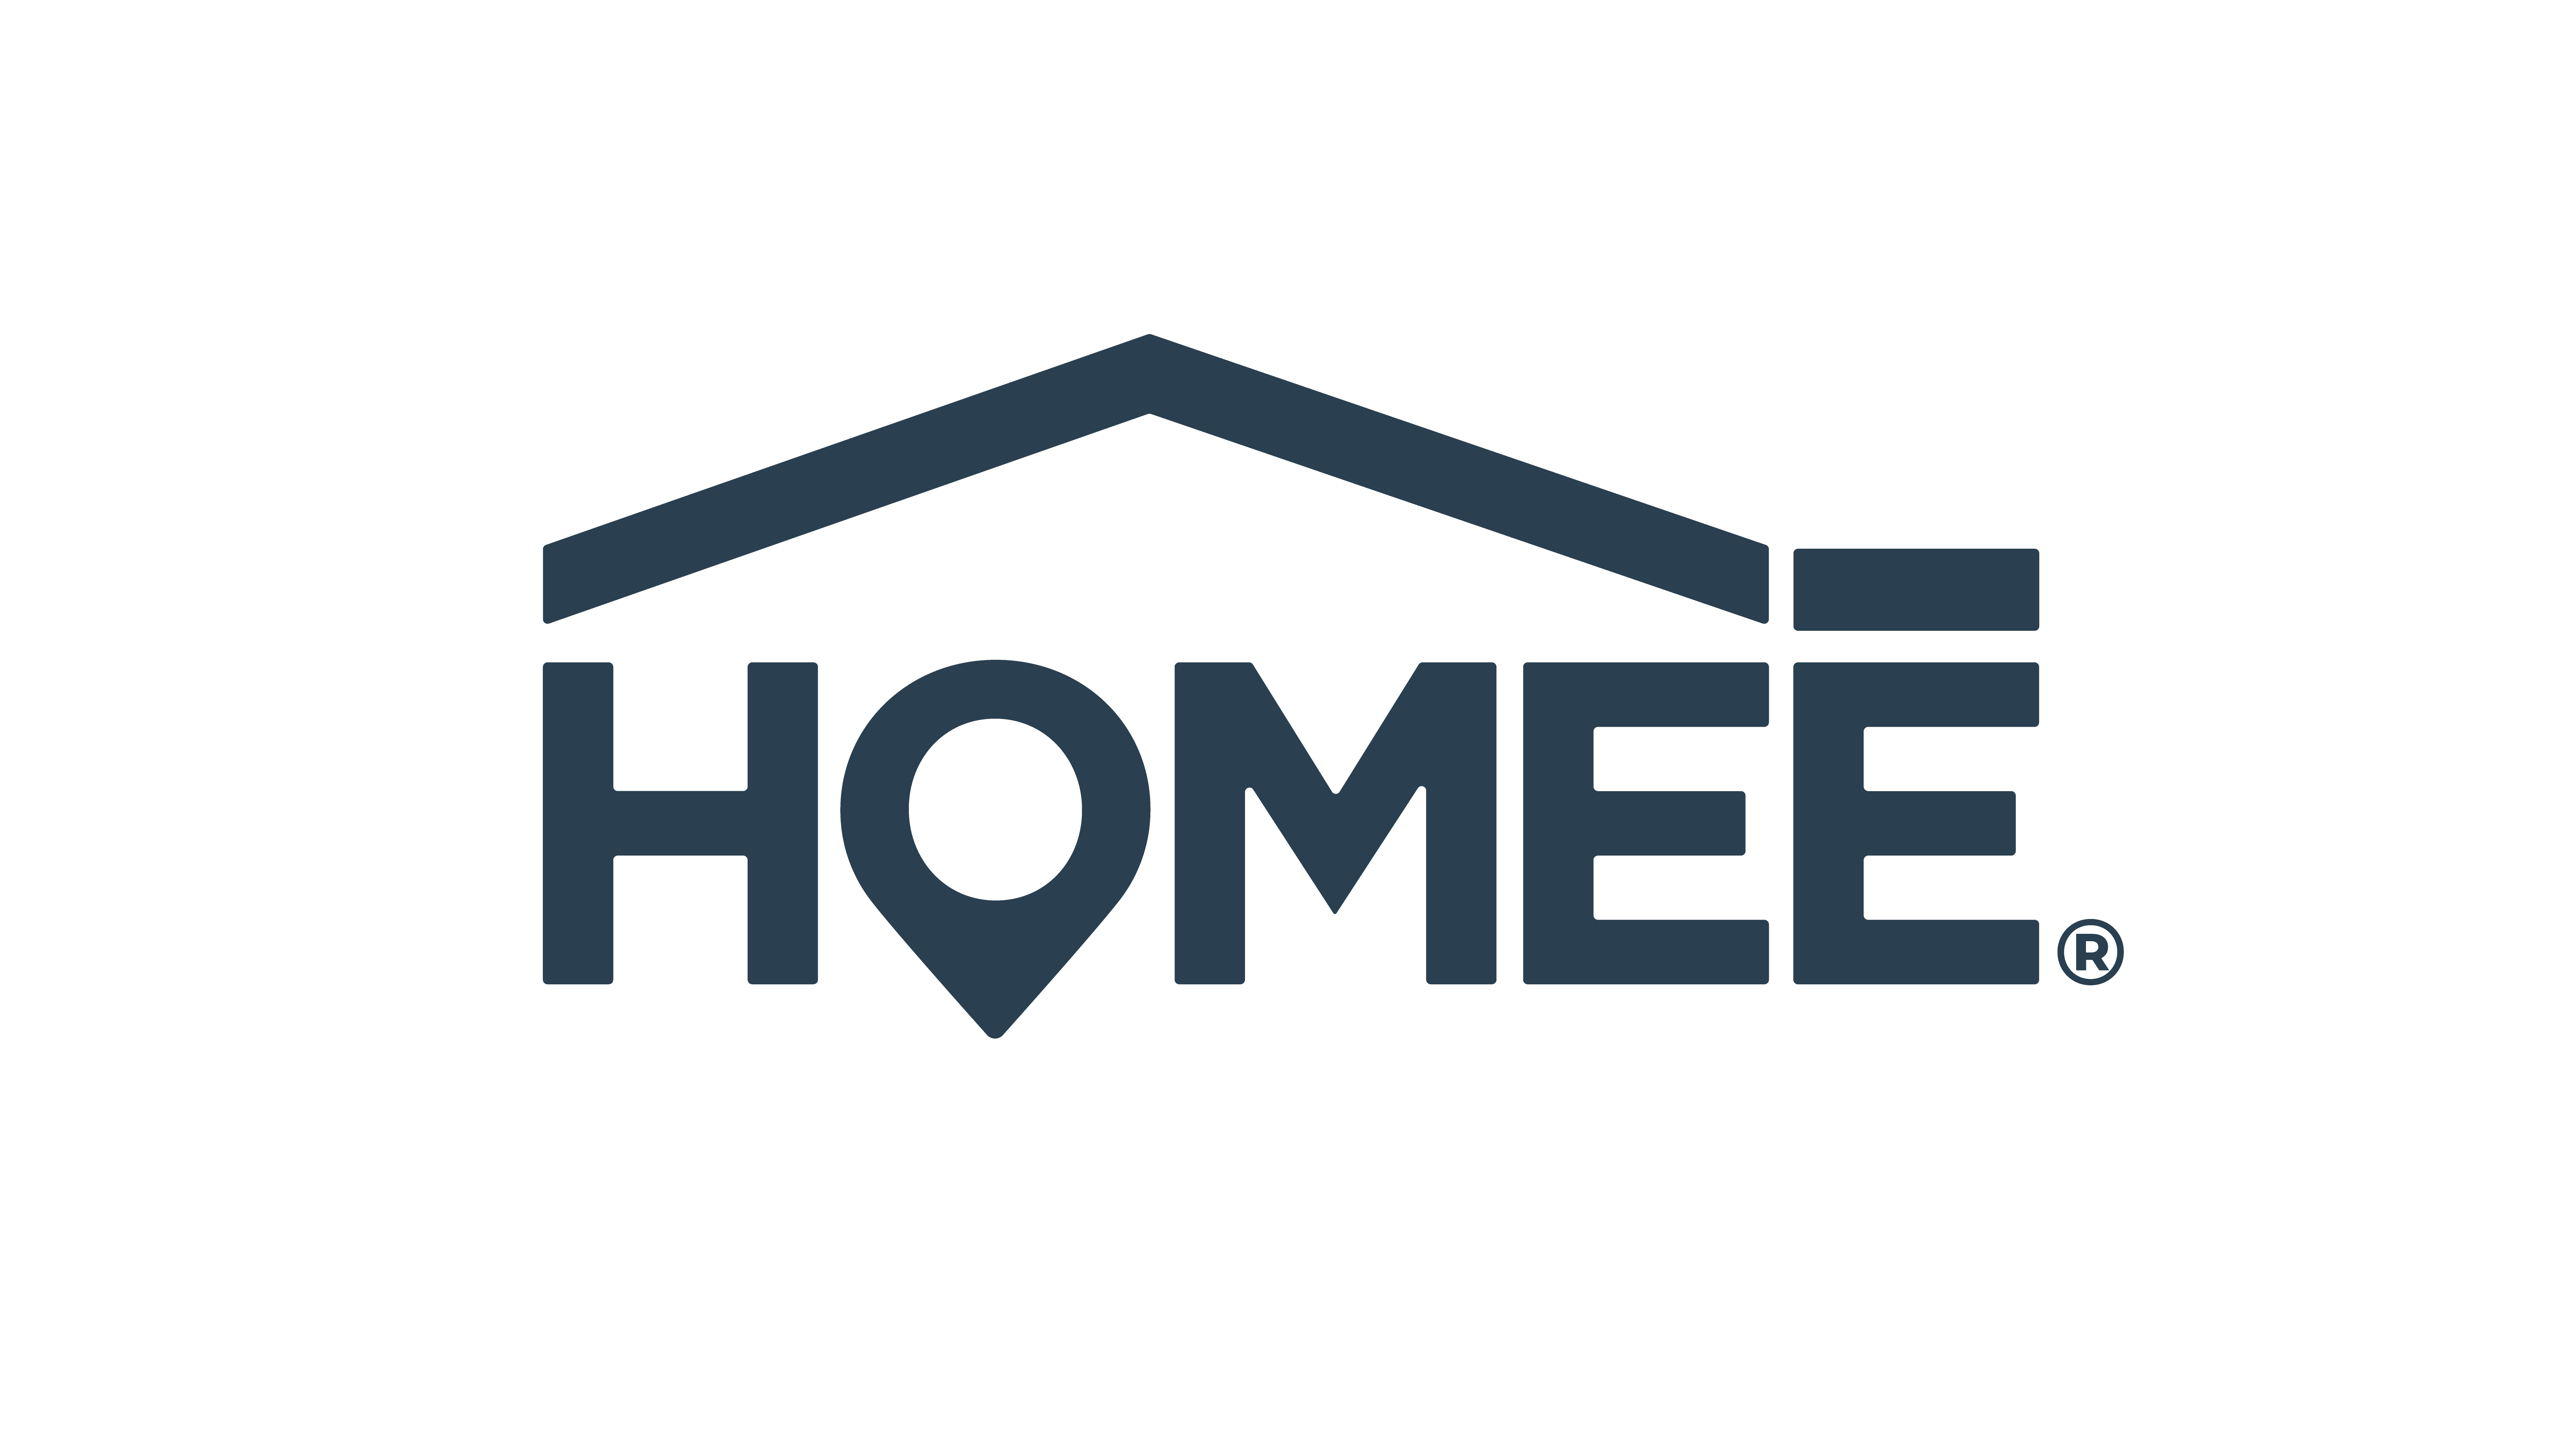 HOMEE to Participate in Renovation of Veteran’s Home